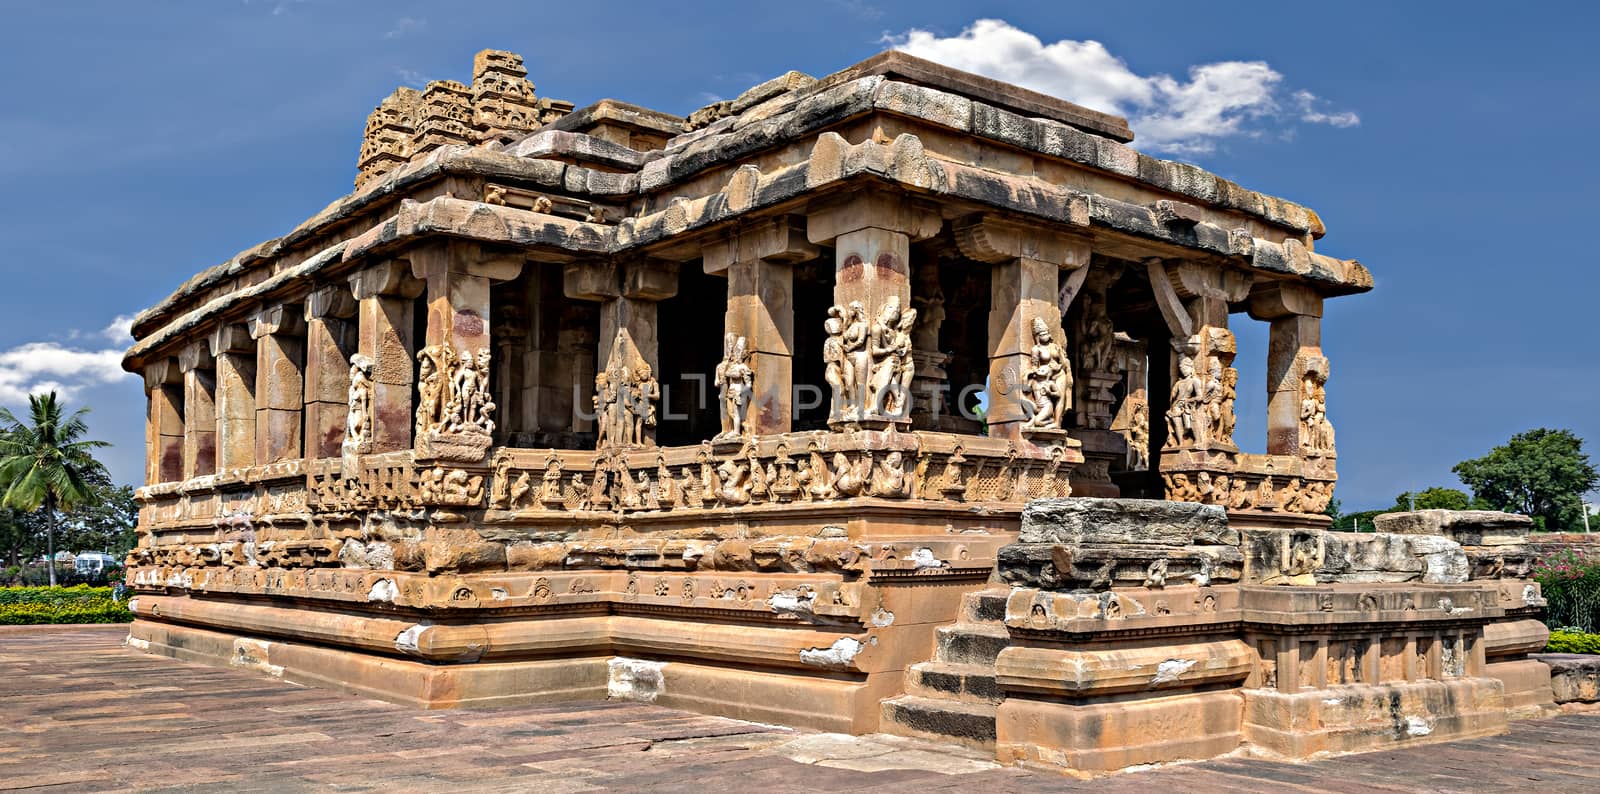 Entrance of Durga temple with blue sky and clouds, Aihole, Bagalkot, Karnataka, India. by lalam